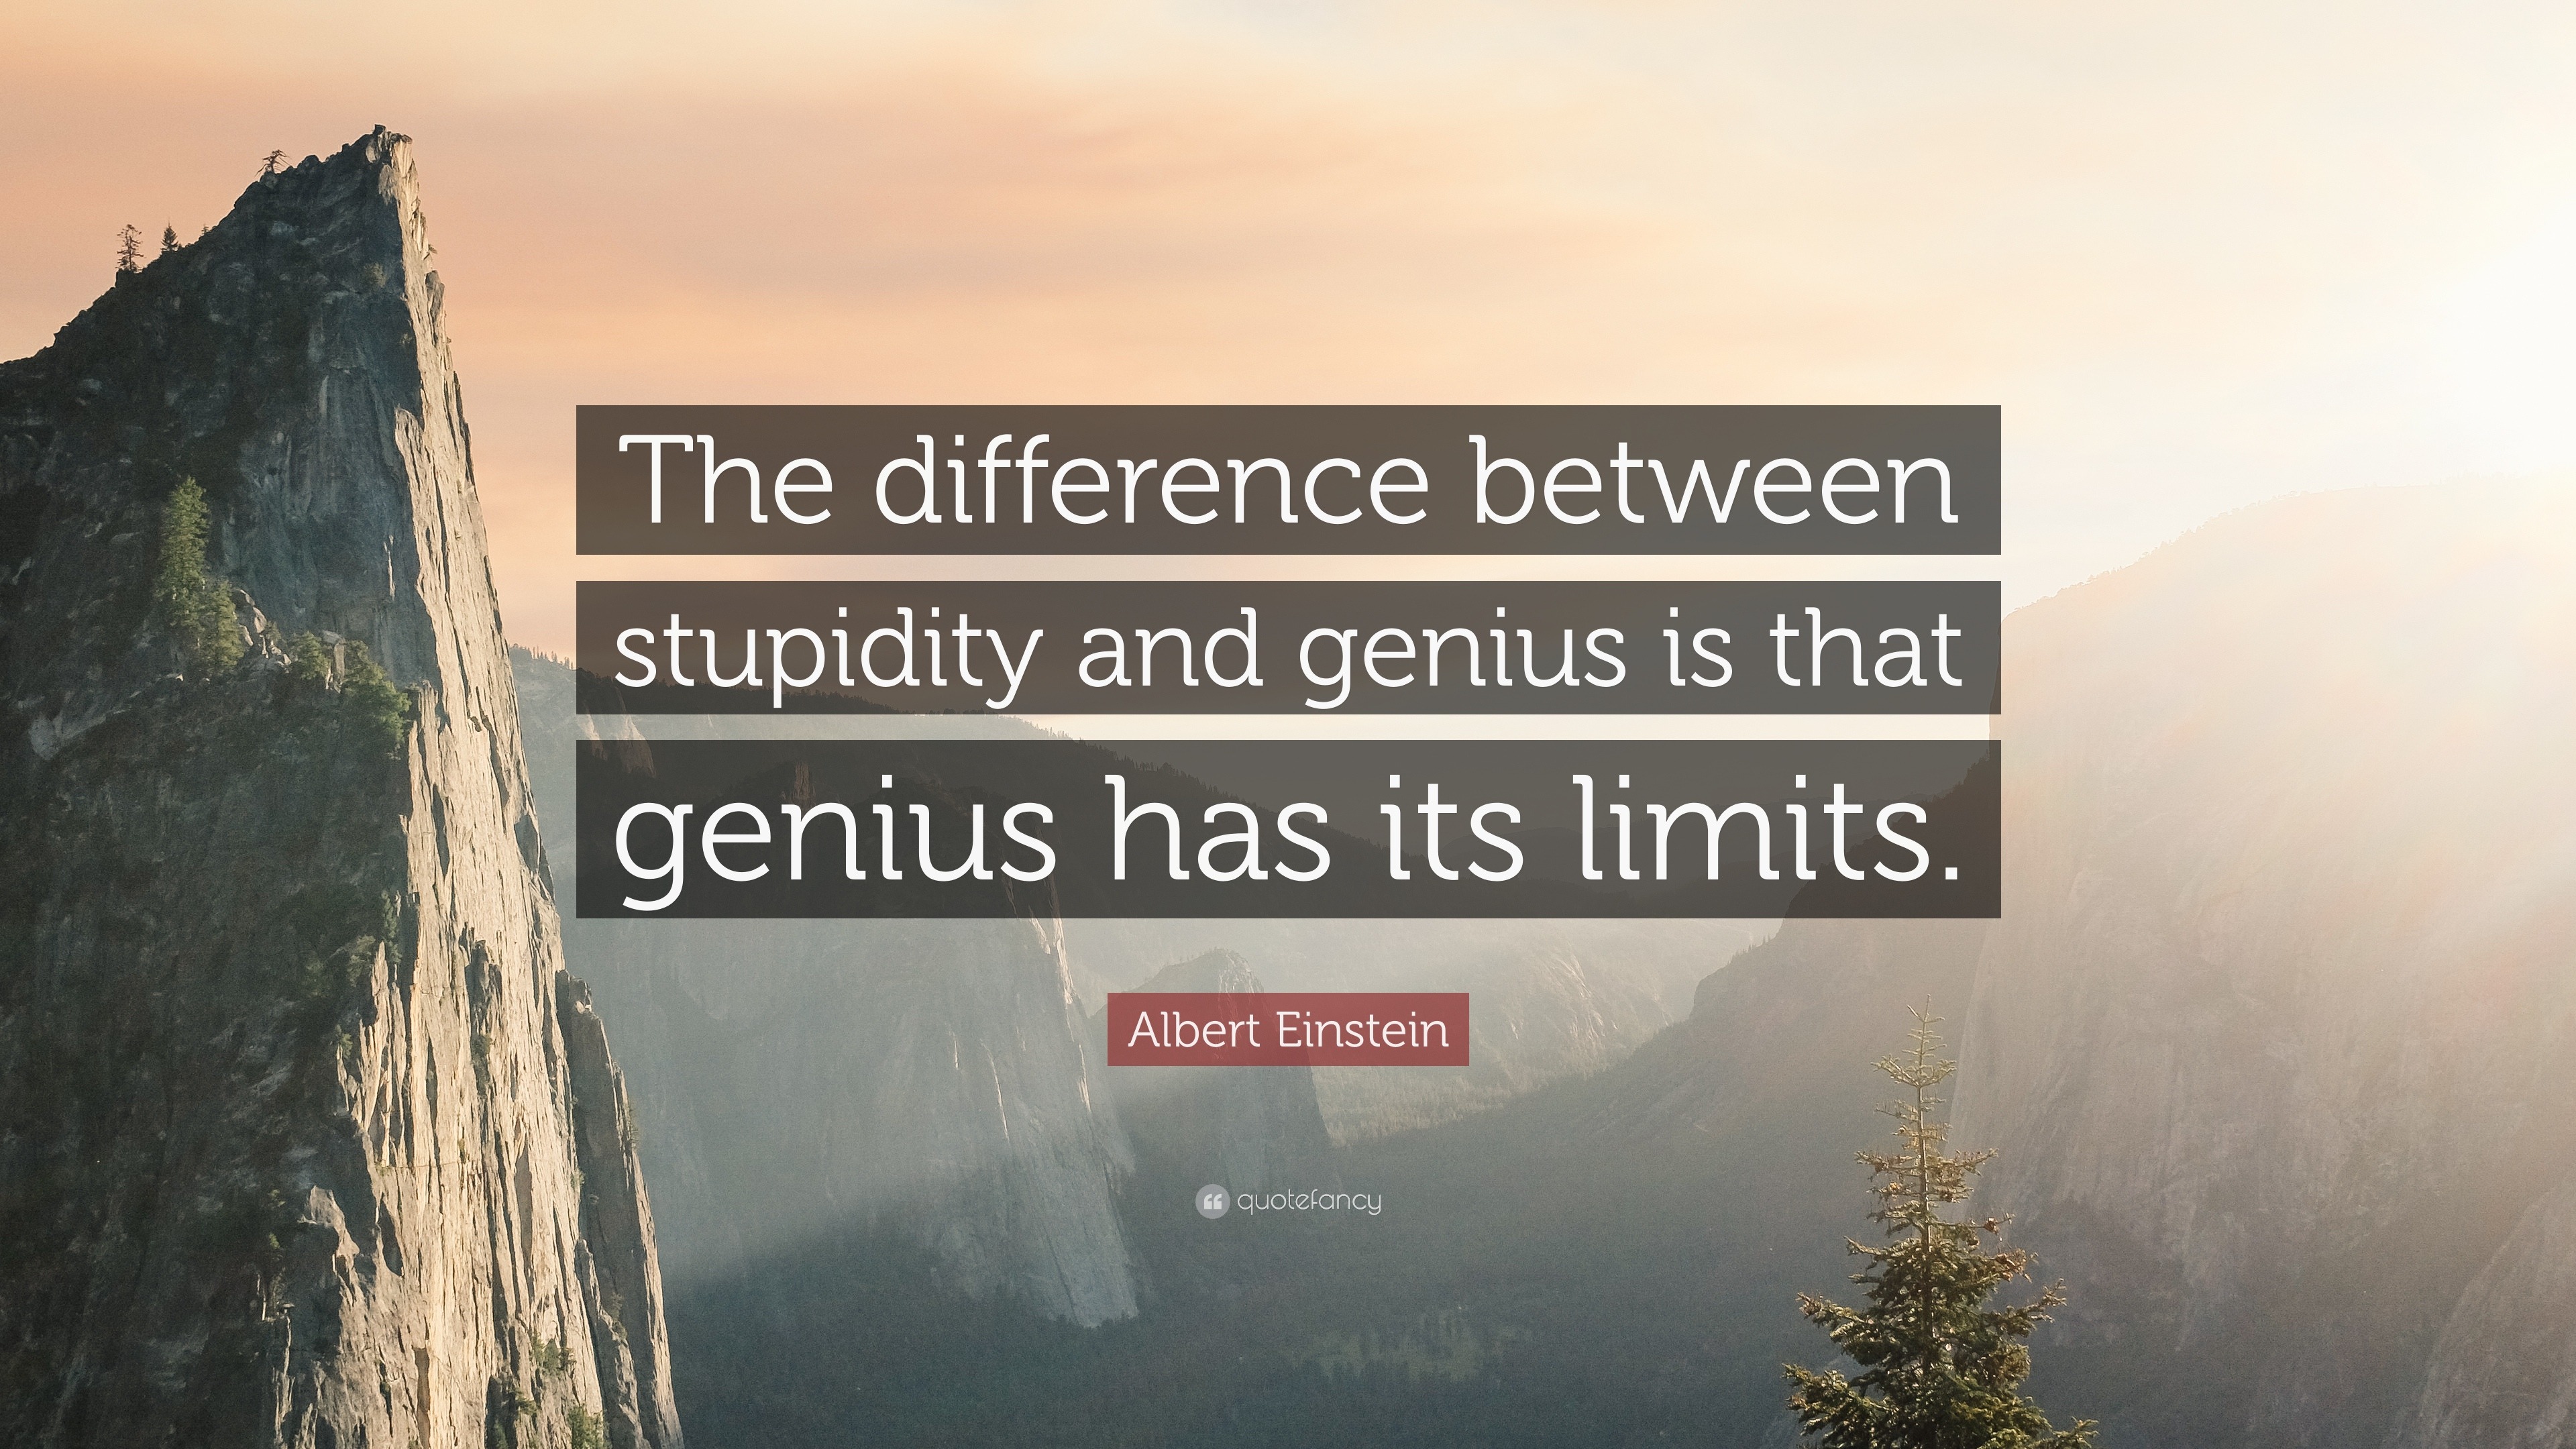 Albert Einstein Quote: "The difference between stupidity ...